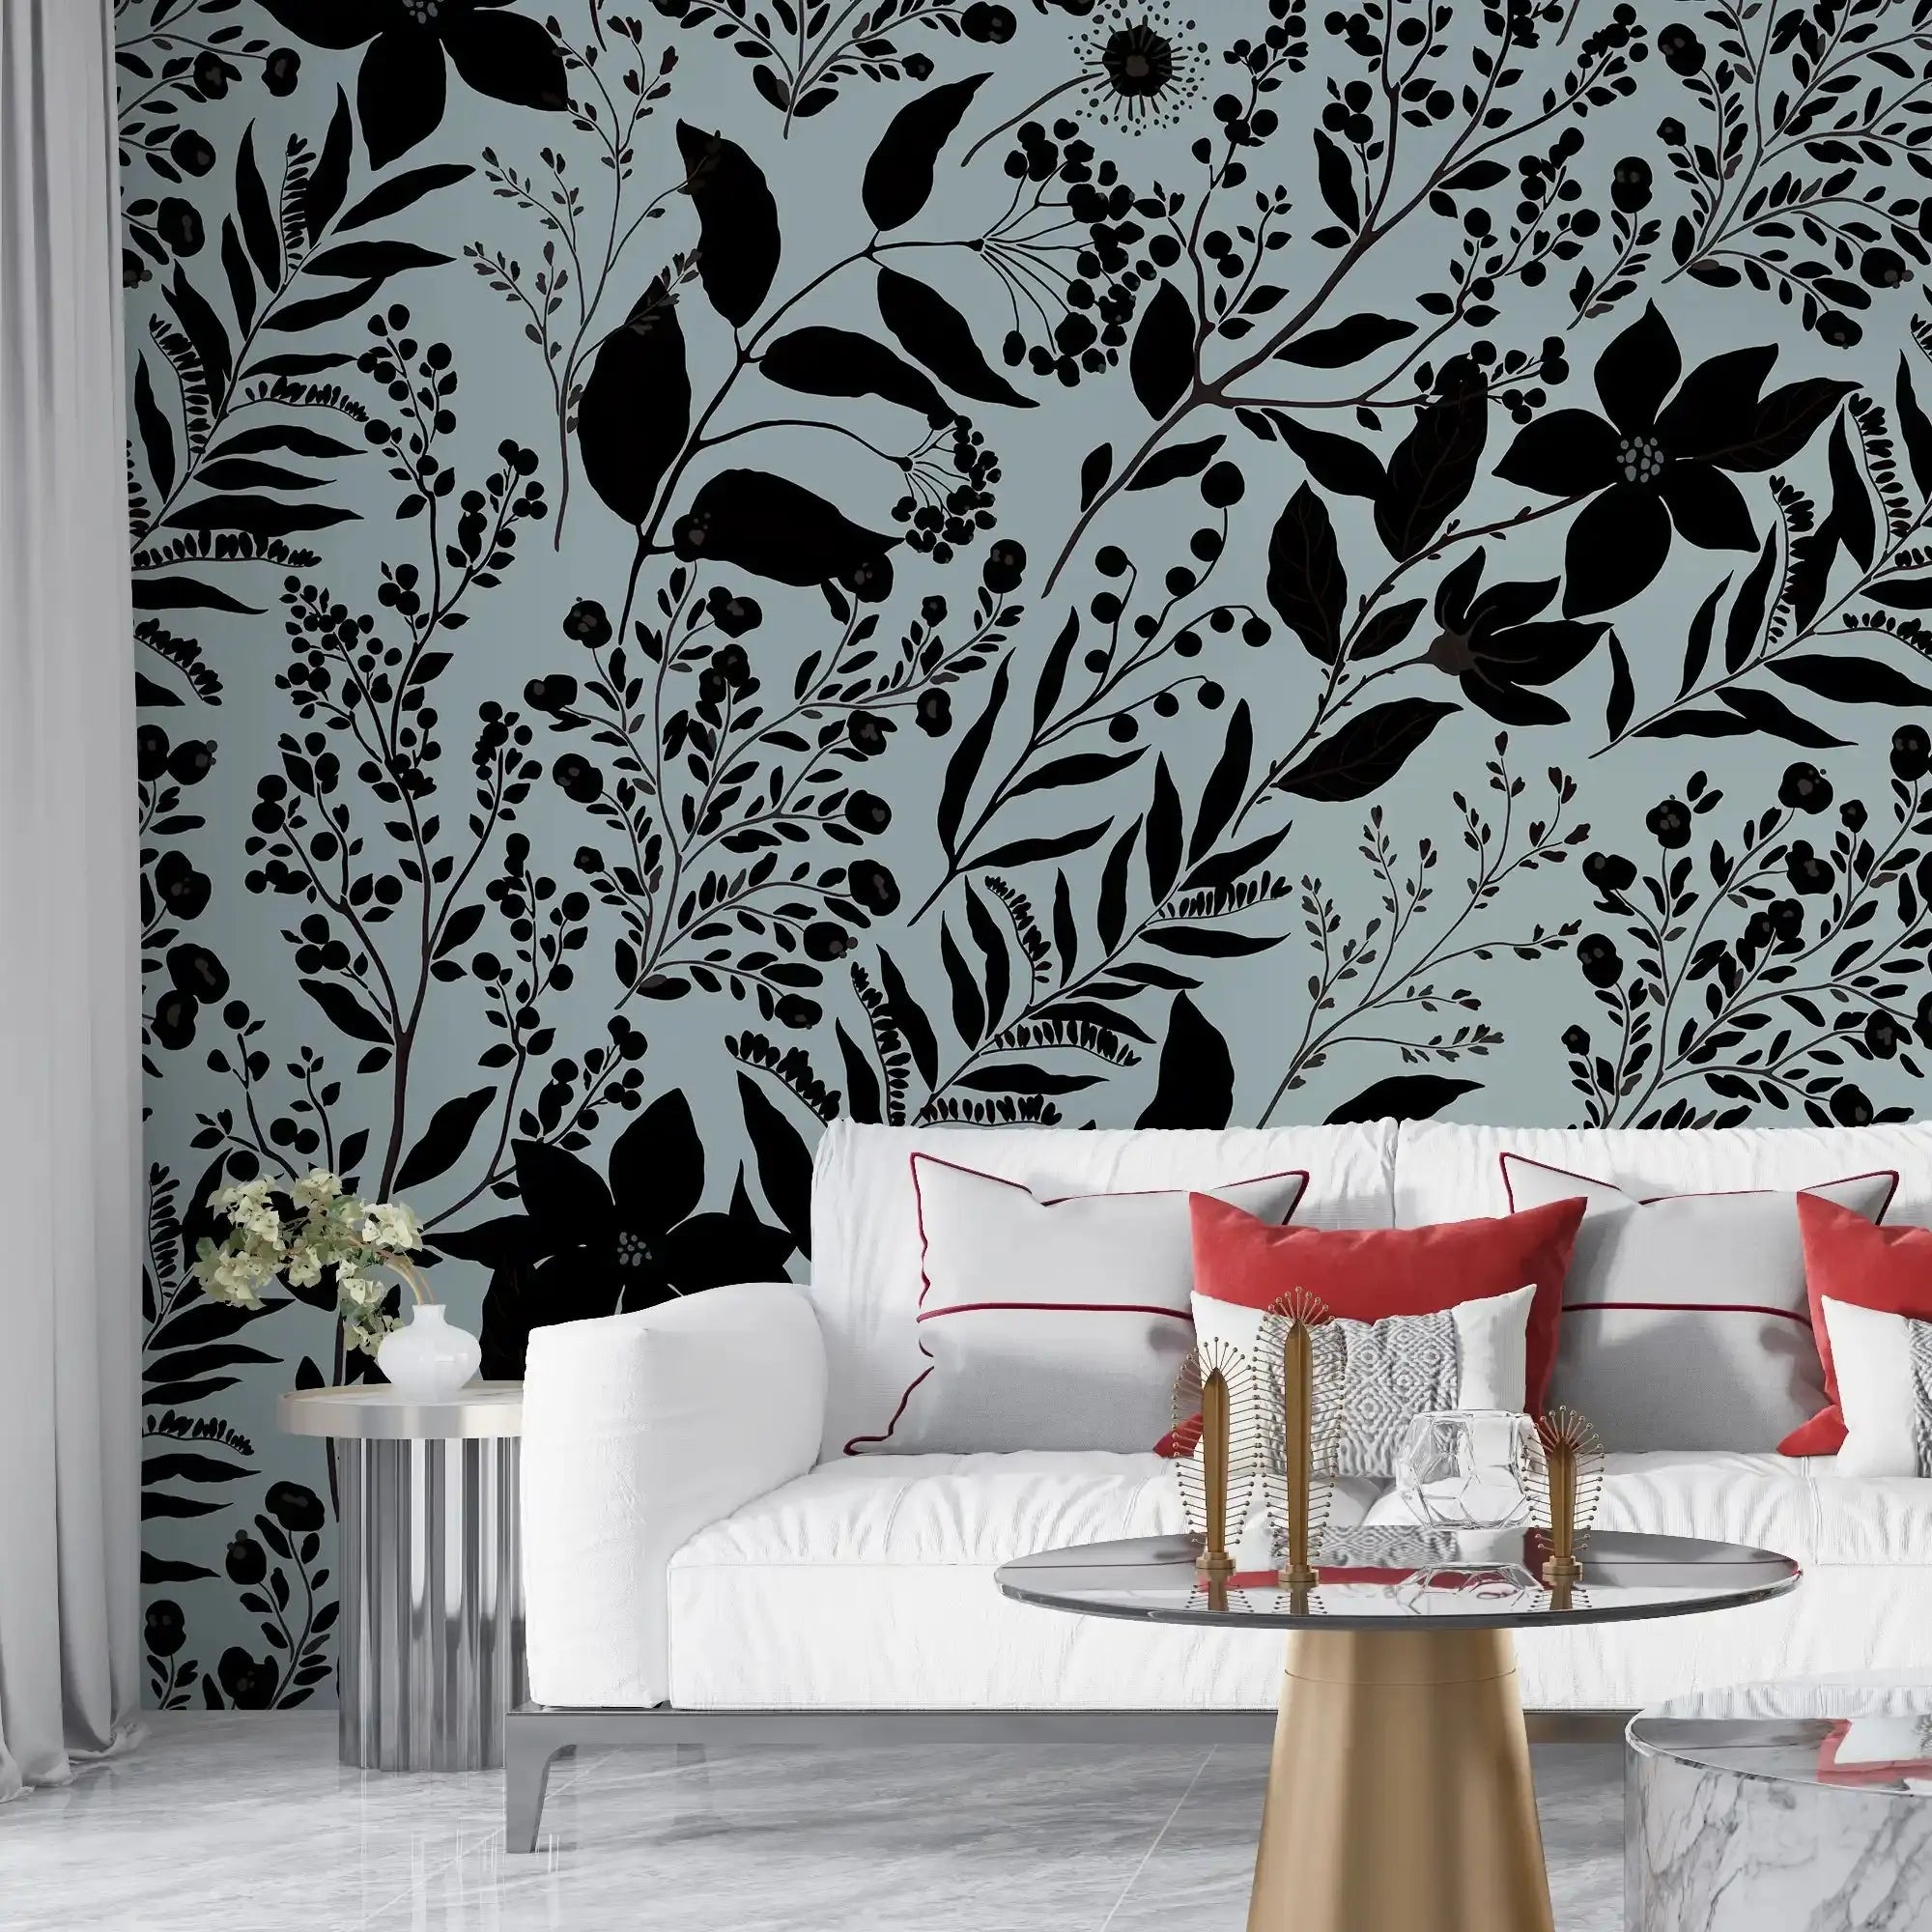 3105-F / Peel and Stick Floral Wallpaper: Pink Flowers and Leaf Design, Easy Apply Wall Decor for Bedroom & Bathroom - Artevella